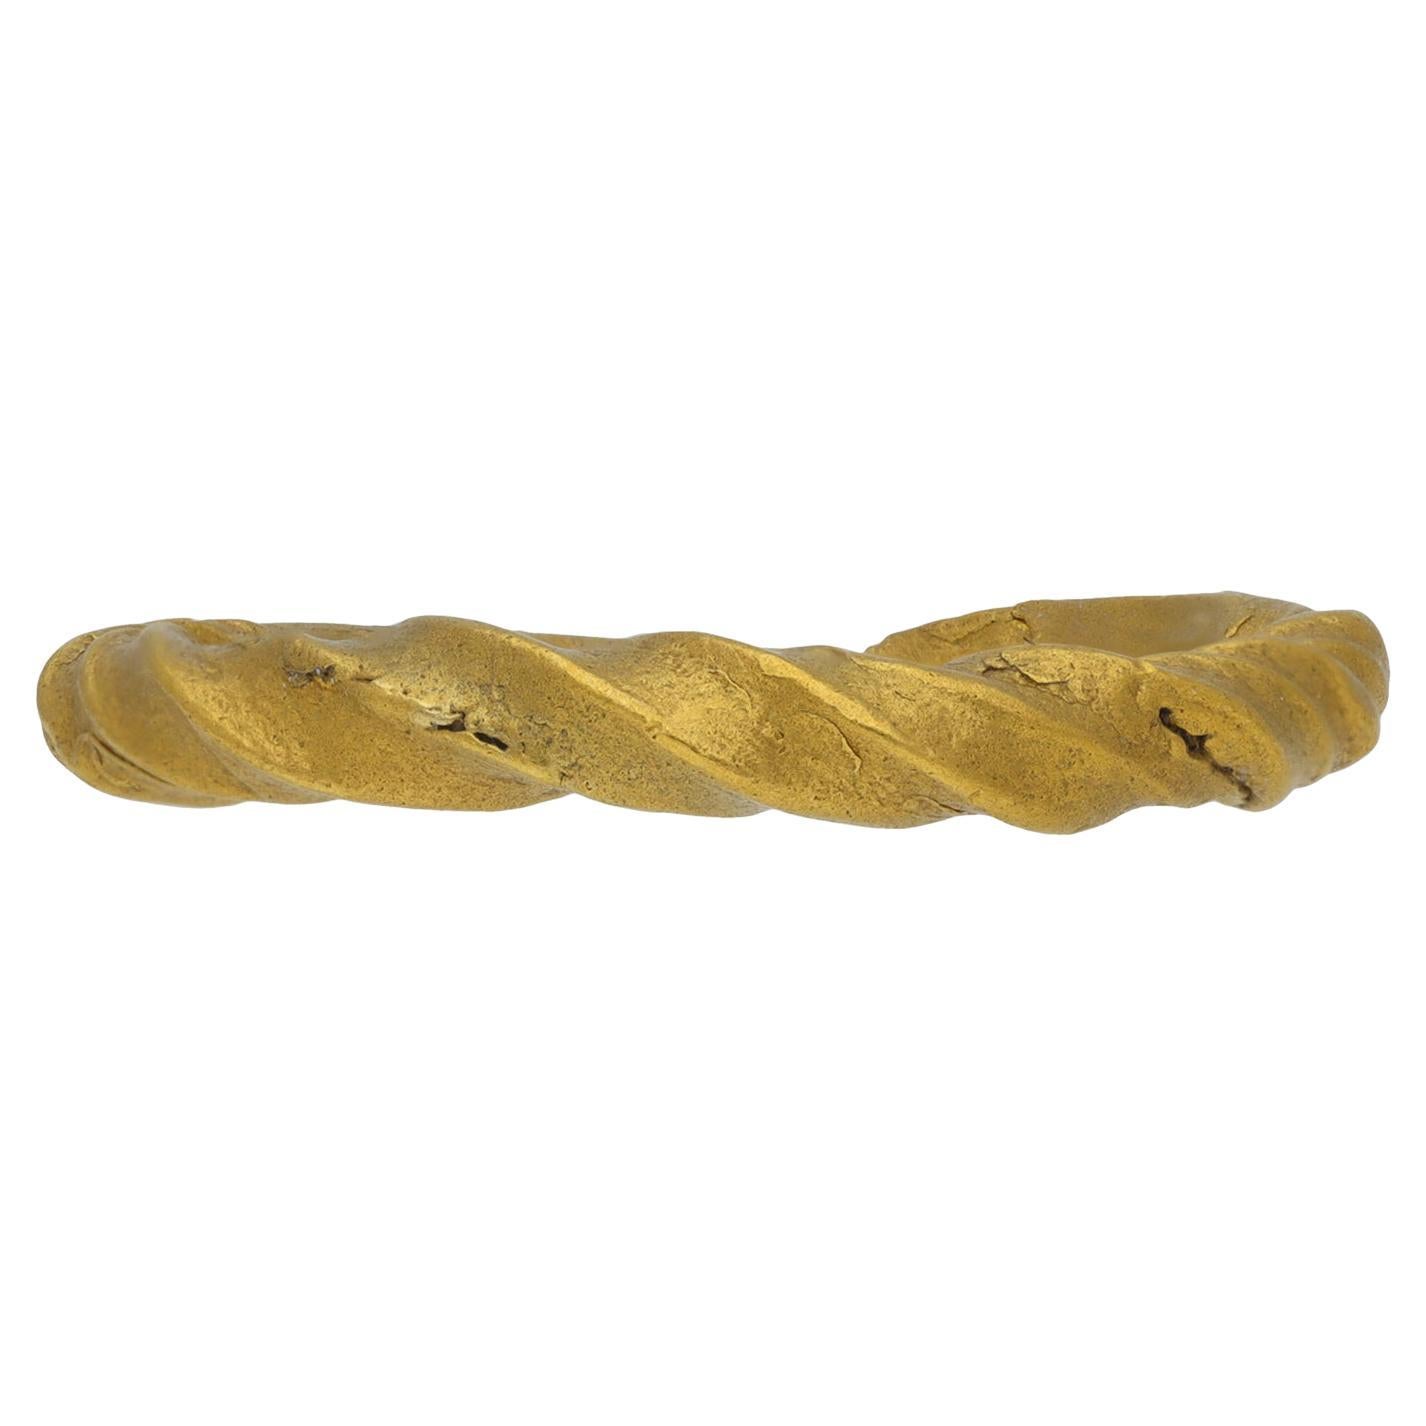 Viking Gold Penannular Twisted Ring, 9th-11th Century